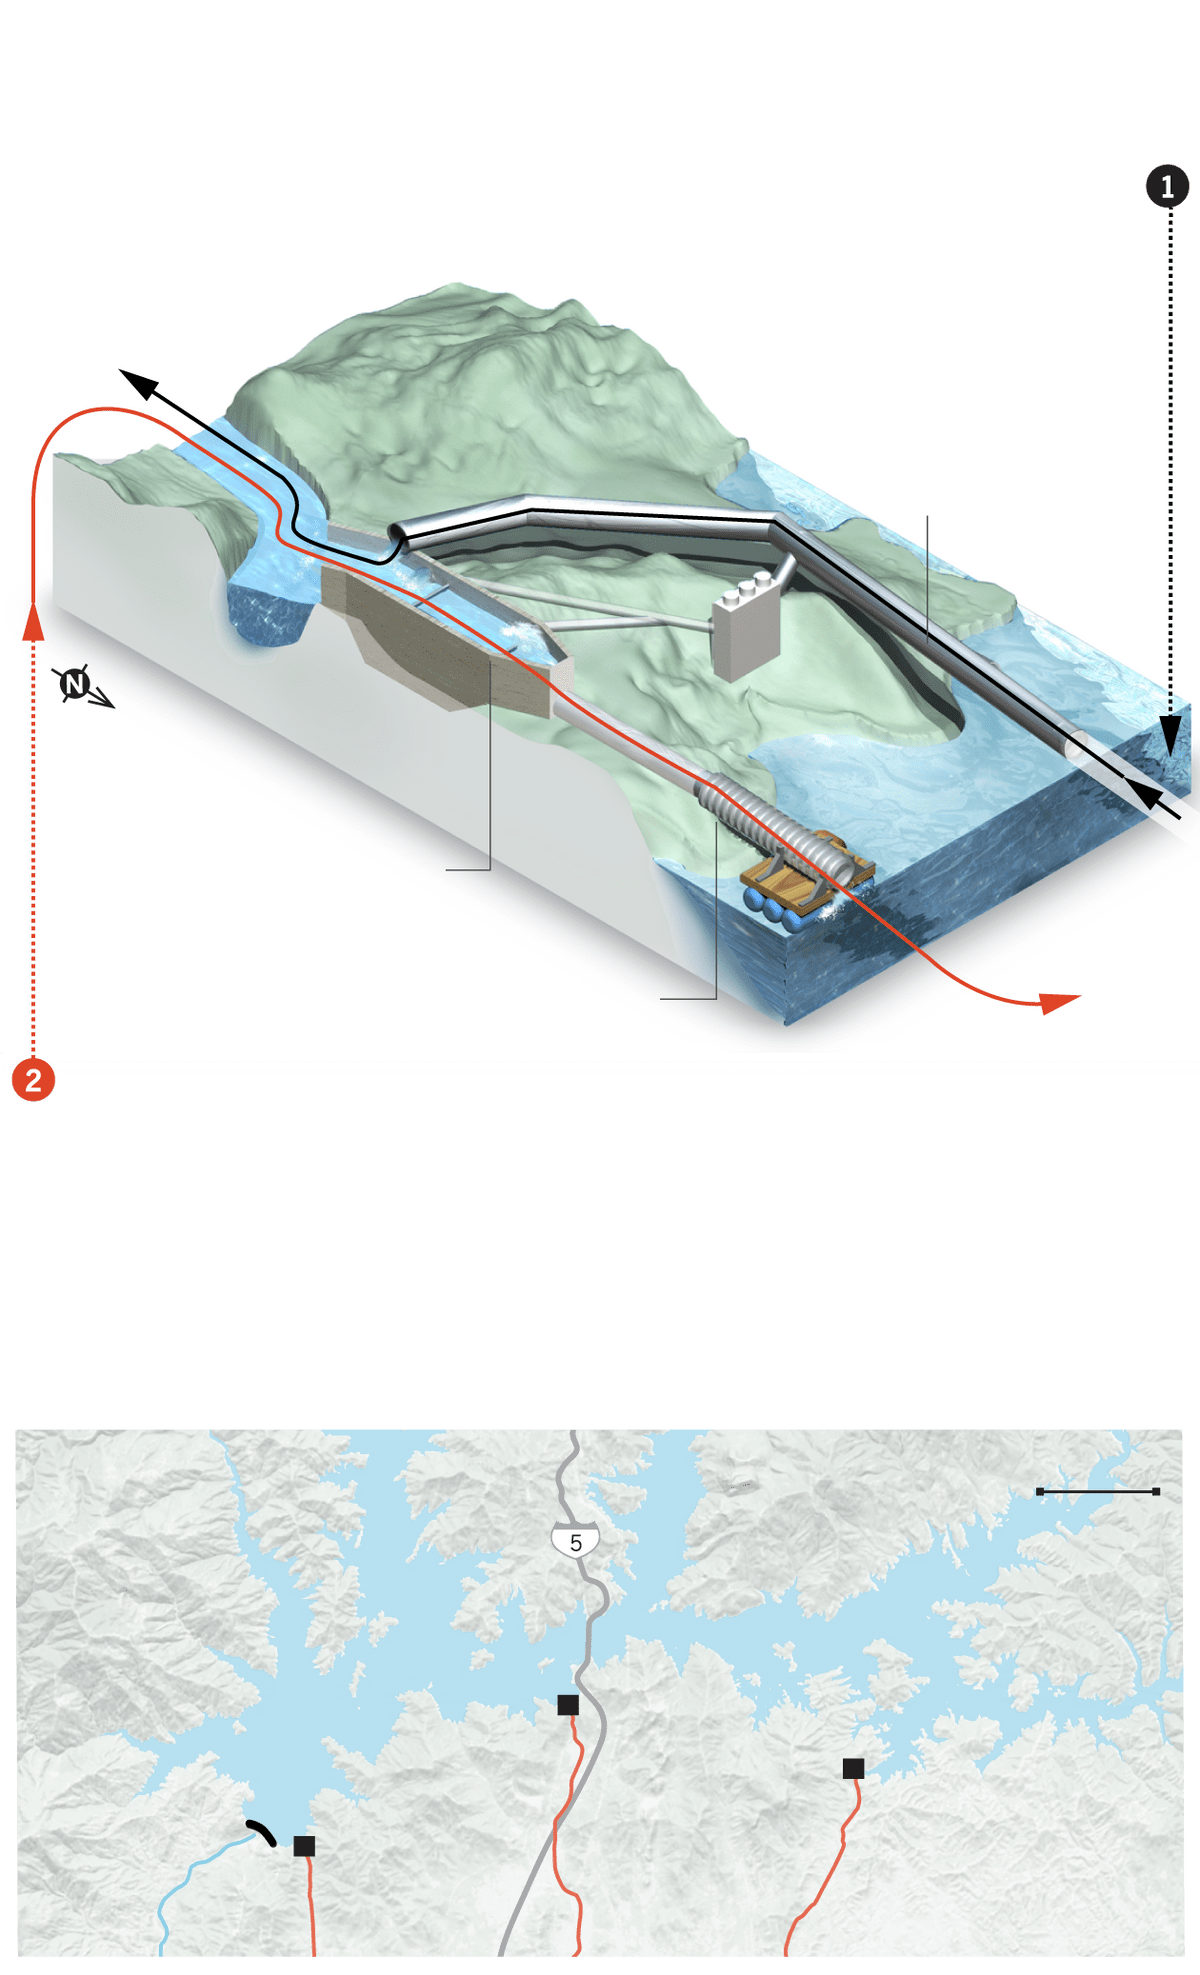 A diagram of the salmon swimway